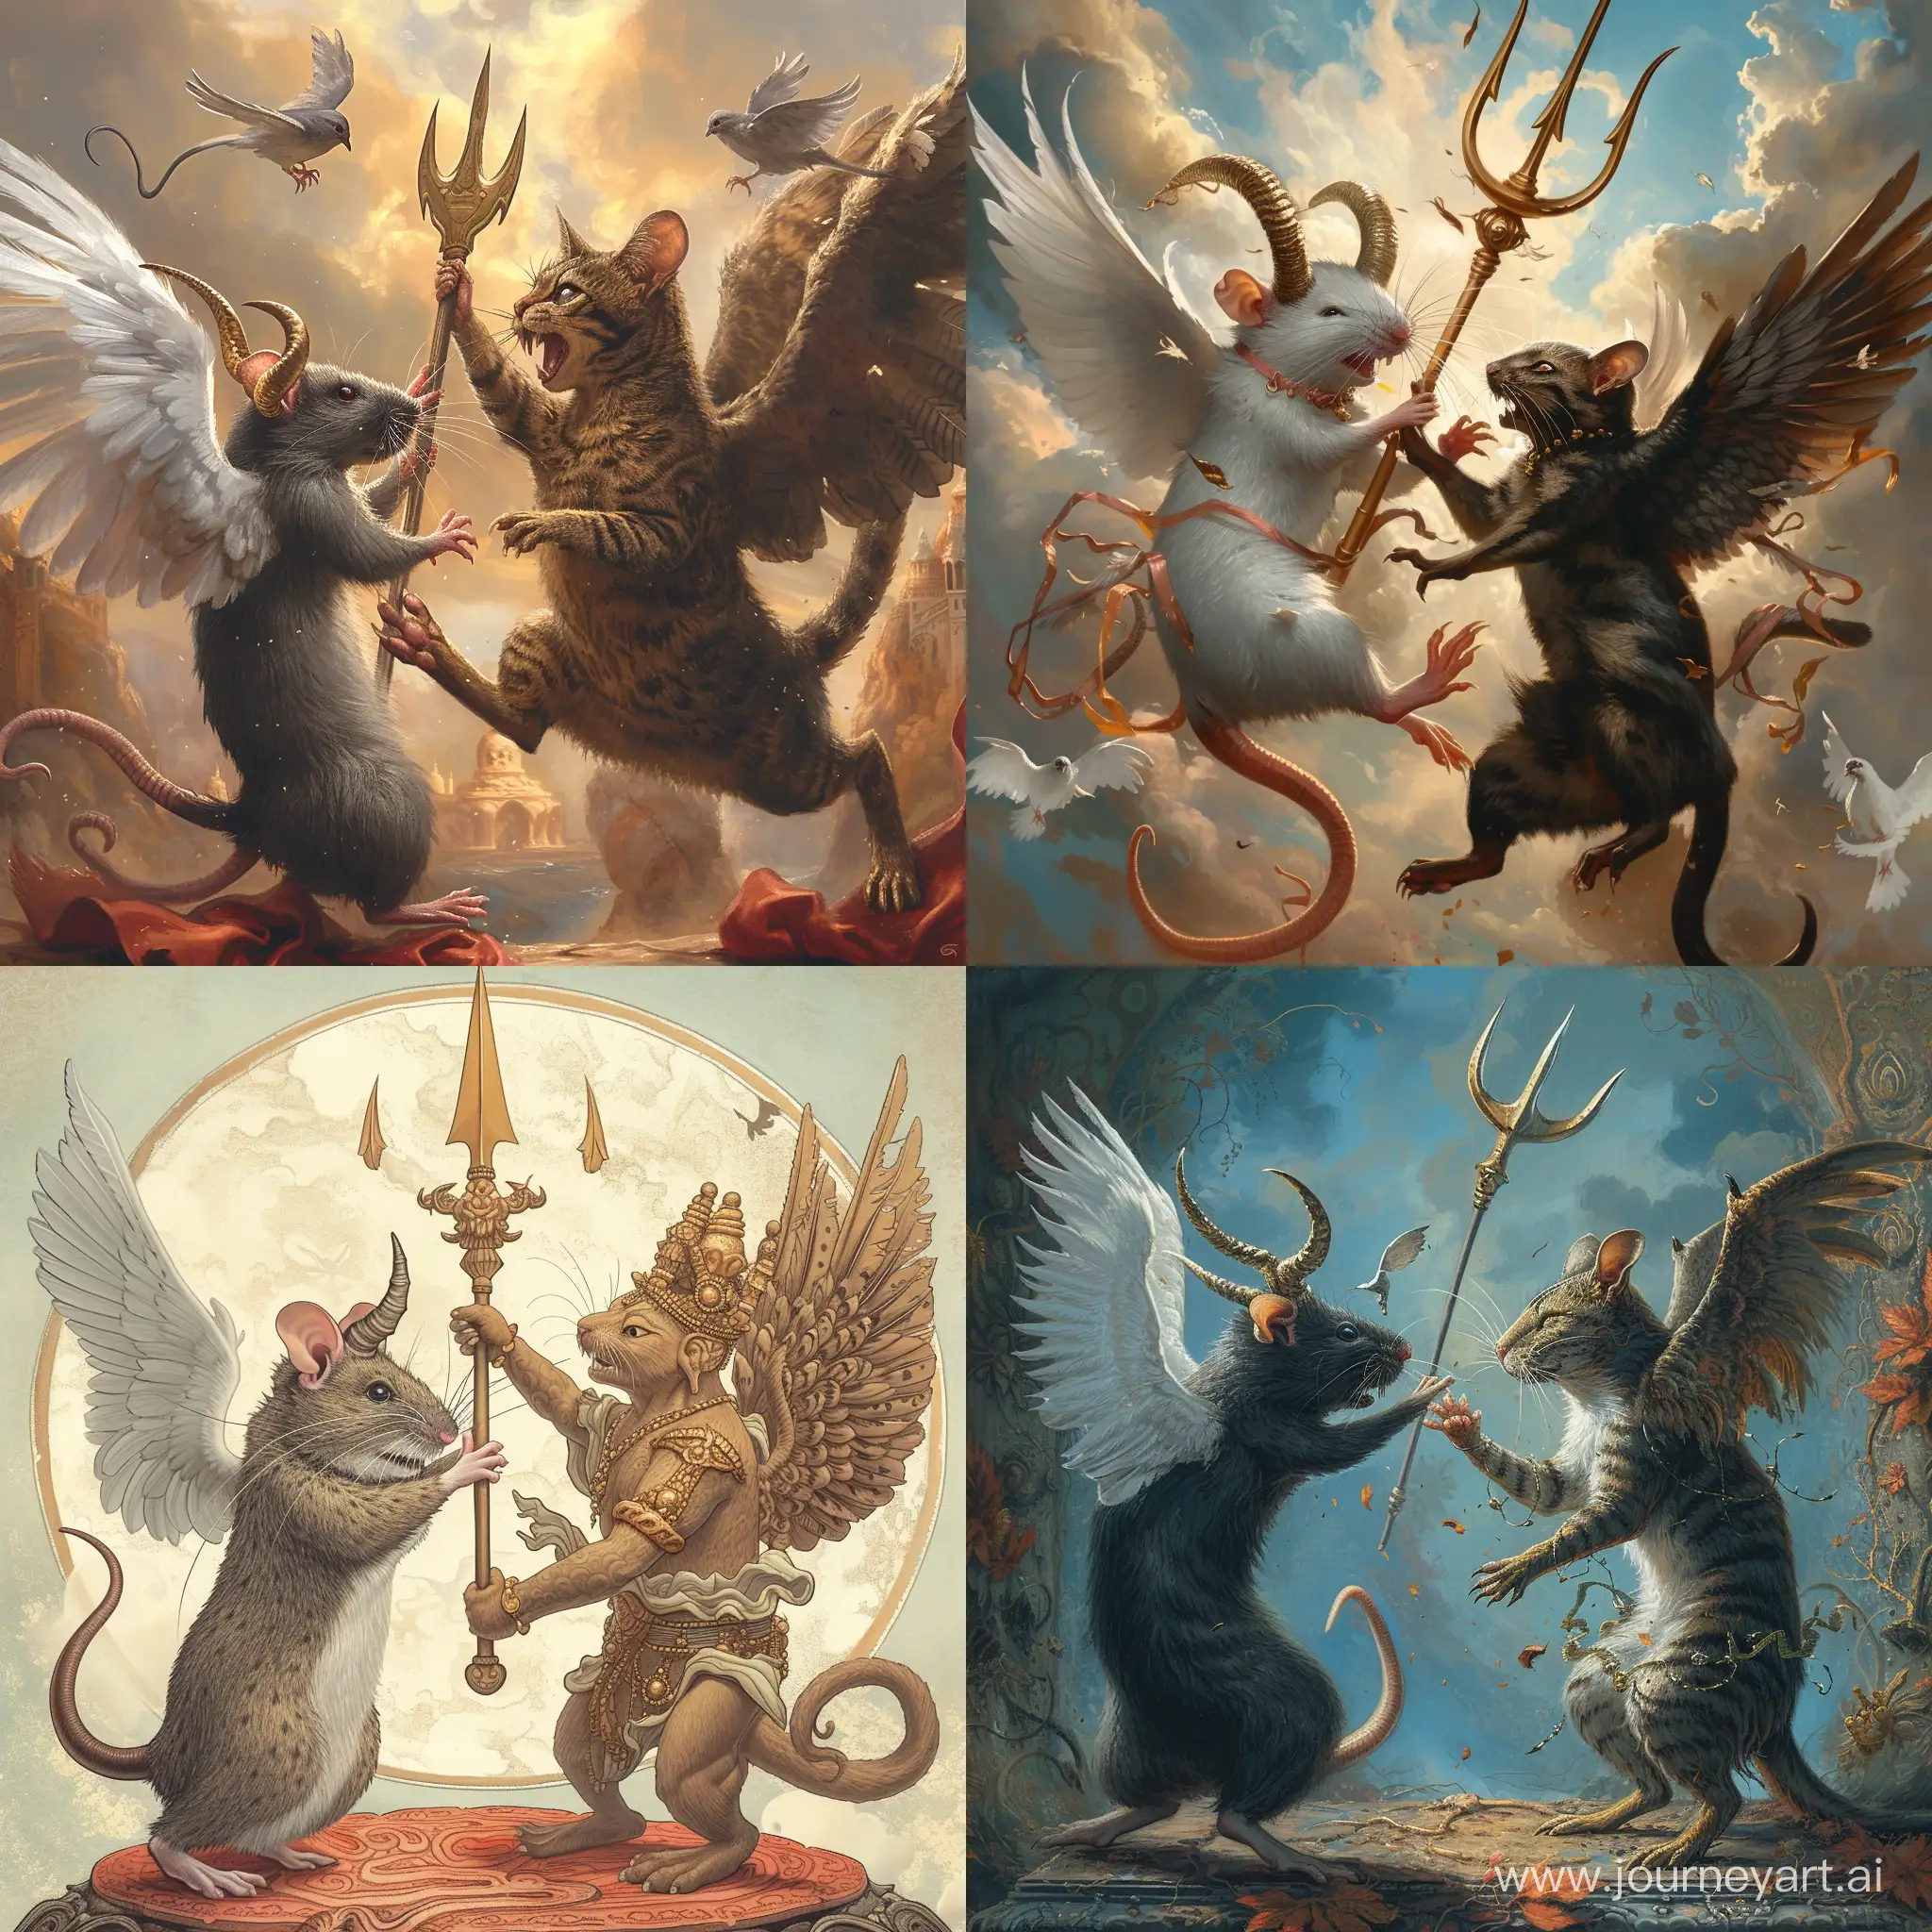 a rat with horns, dove wings and a trident in his hands, fights with the cat Buddha, who understood the tao and is the crown of creation of the universe